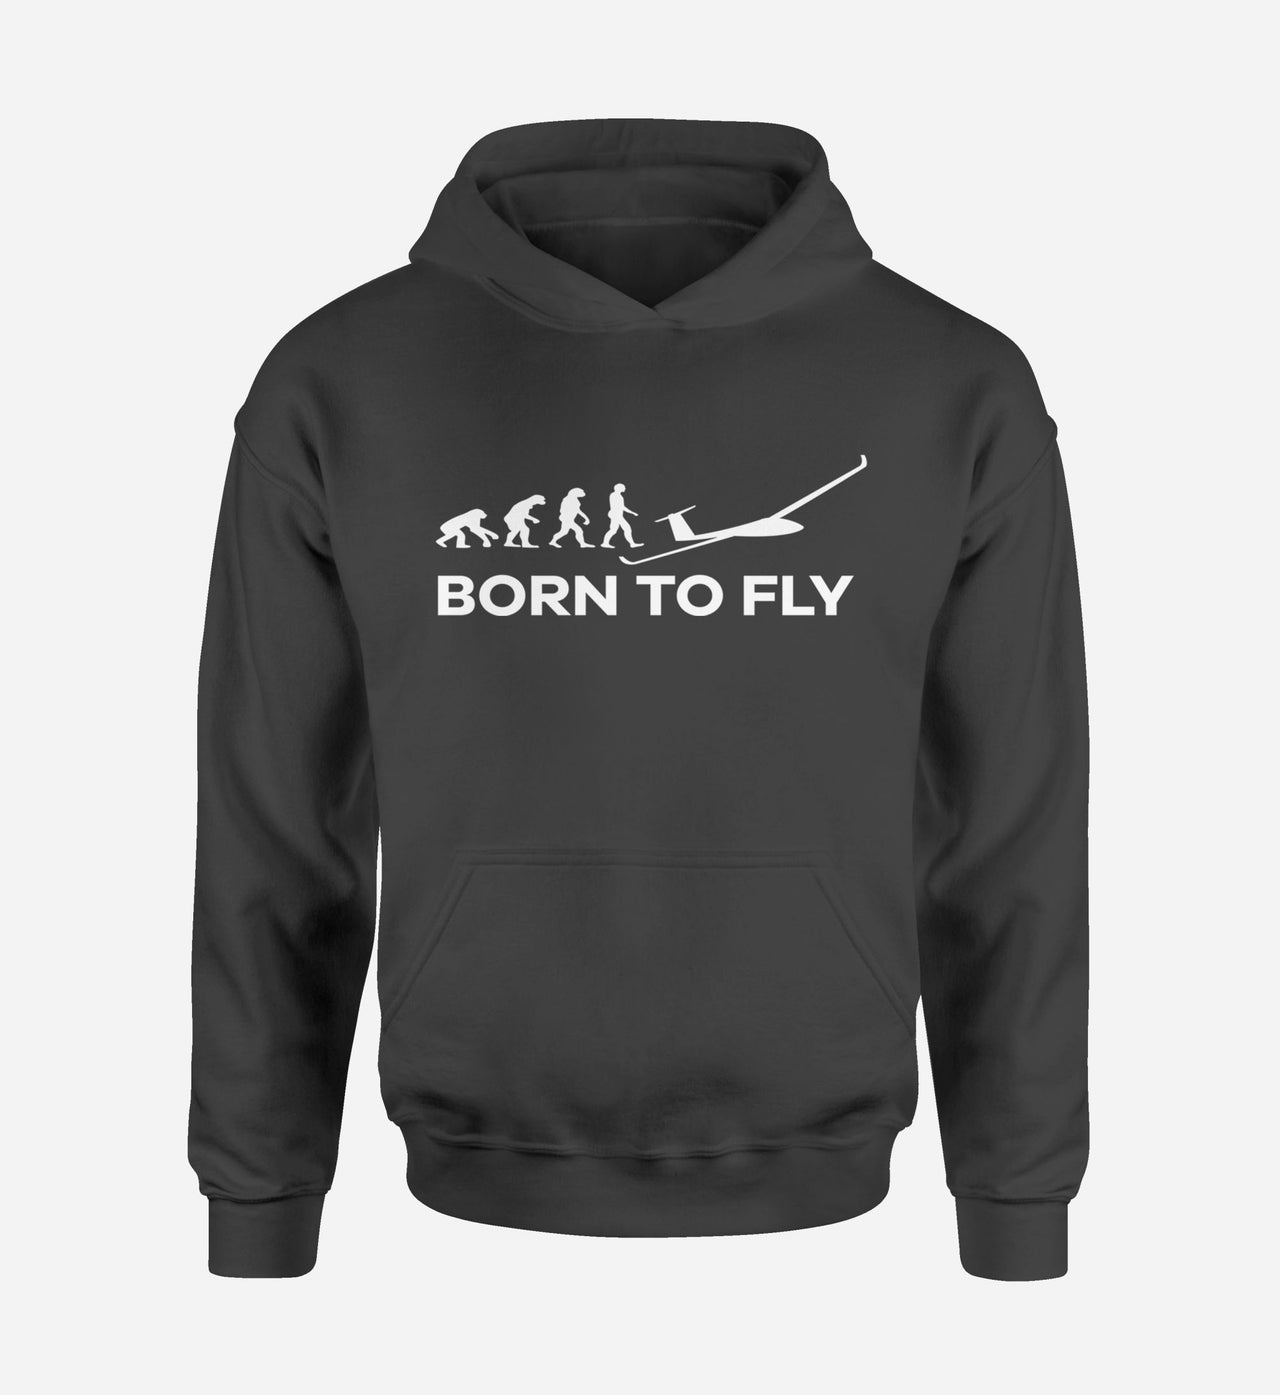 Born To Fly Glider Designed Hoodies